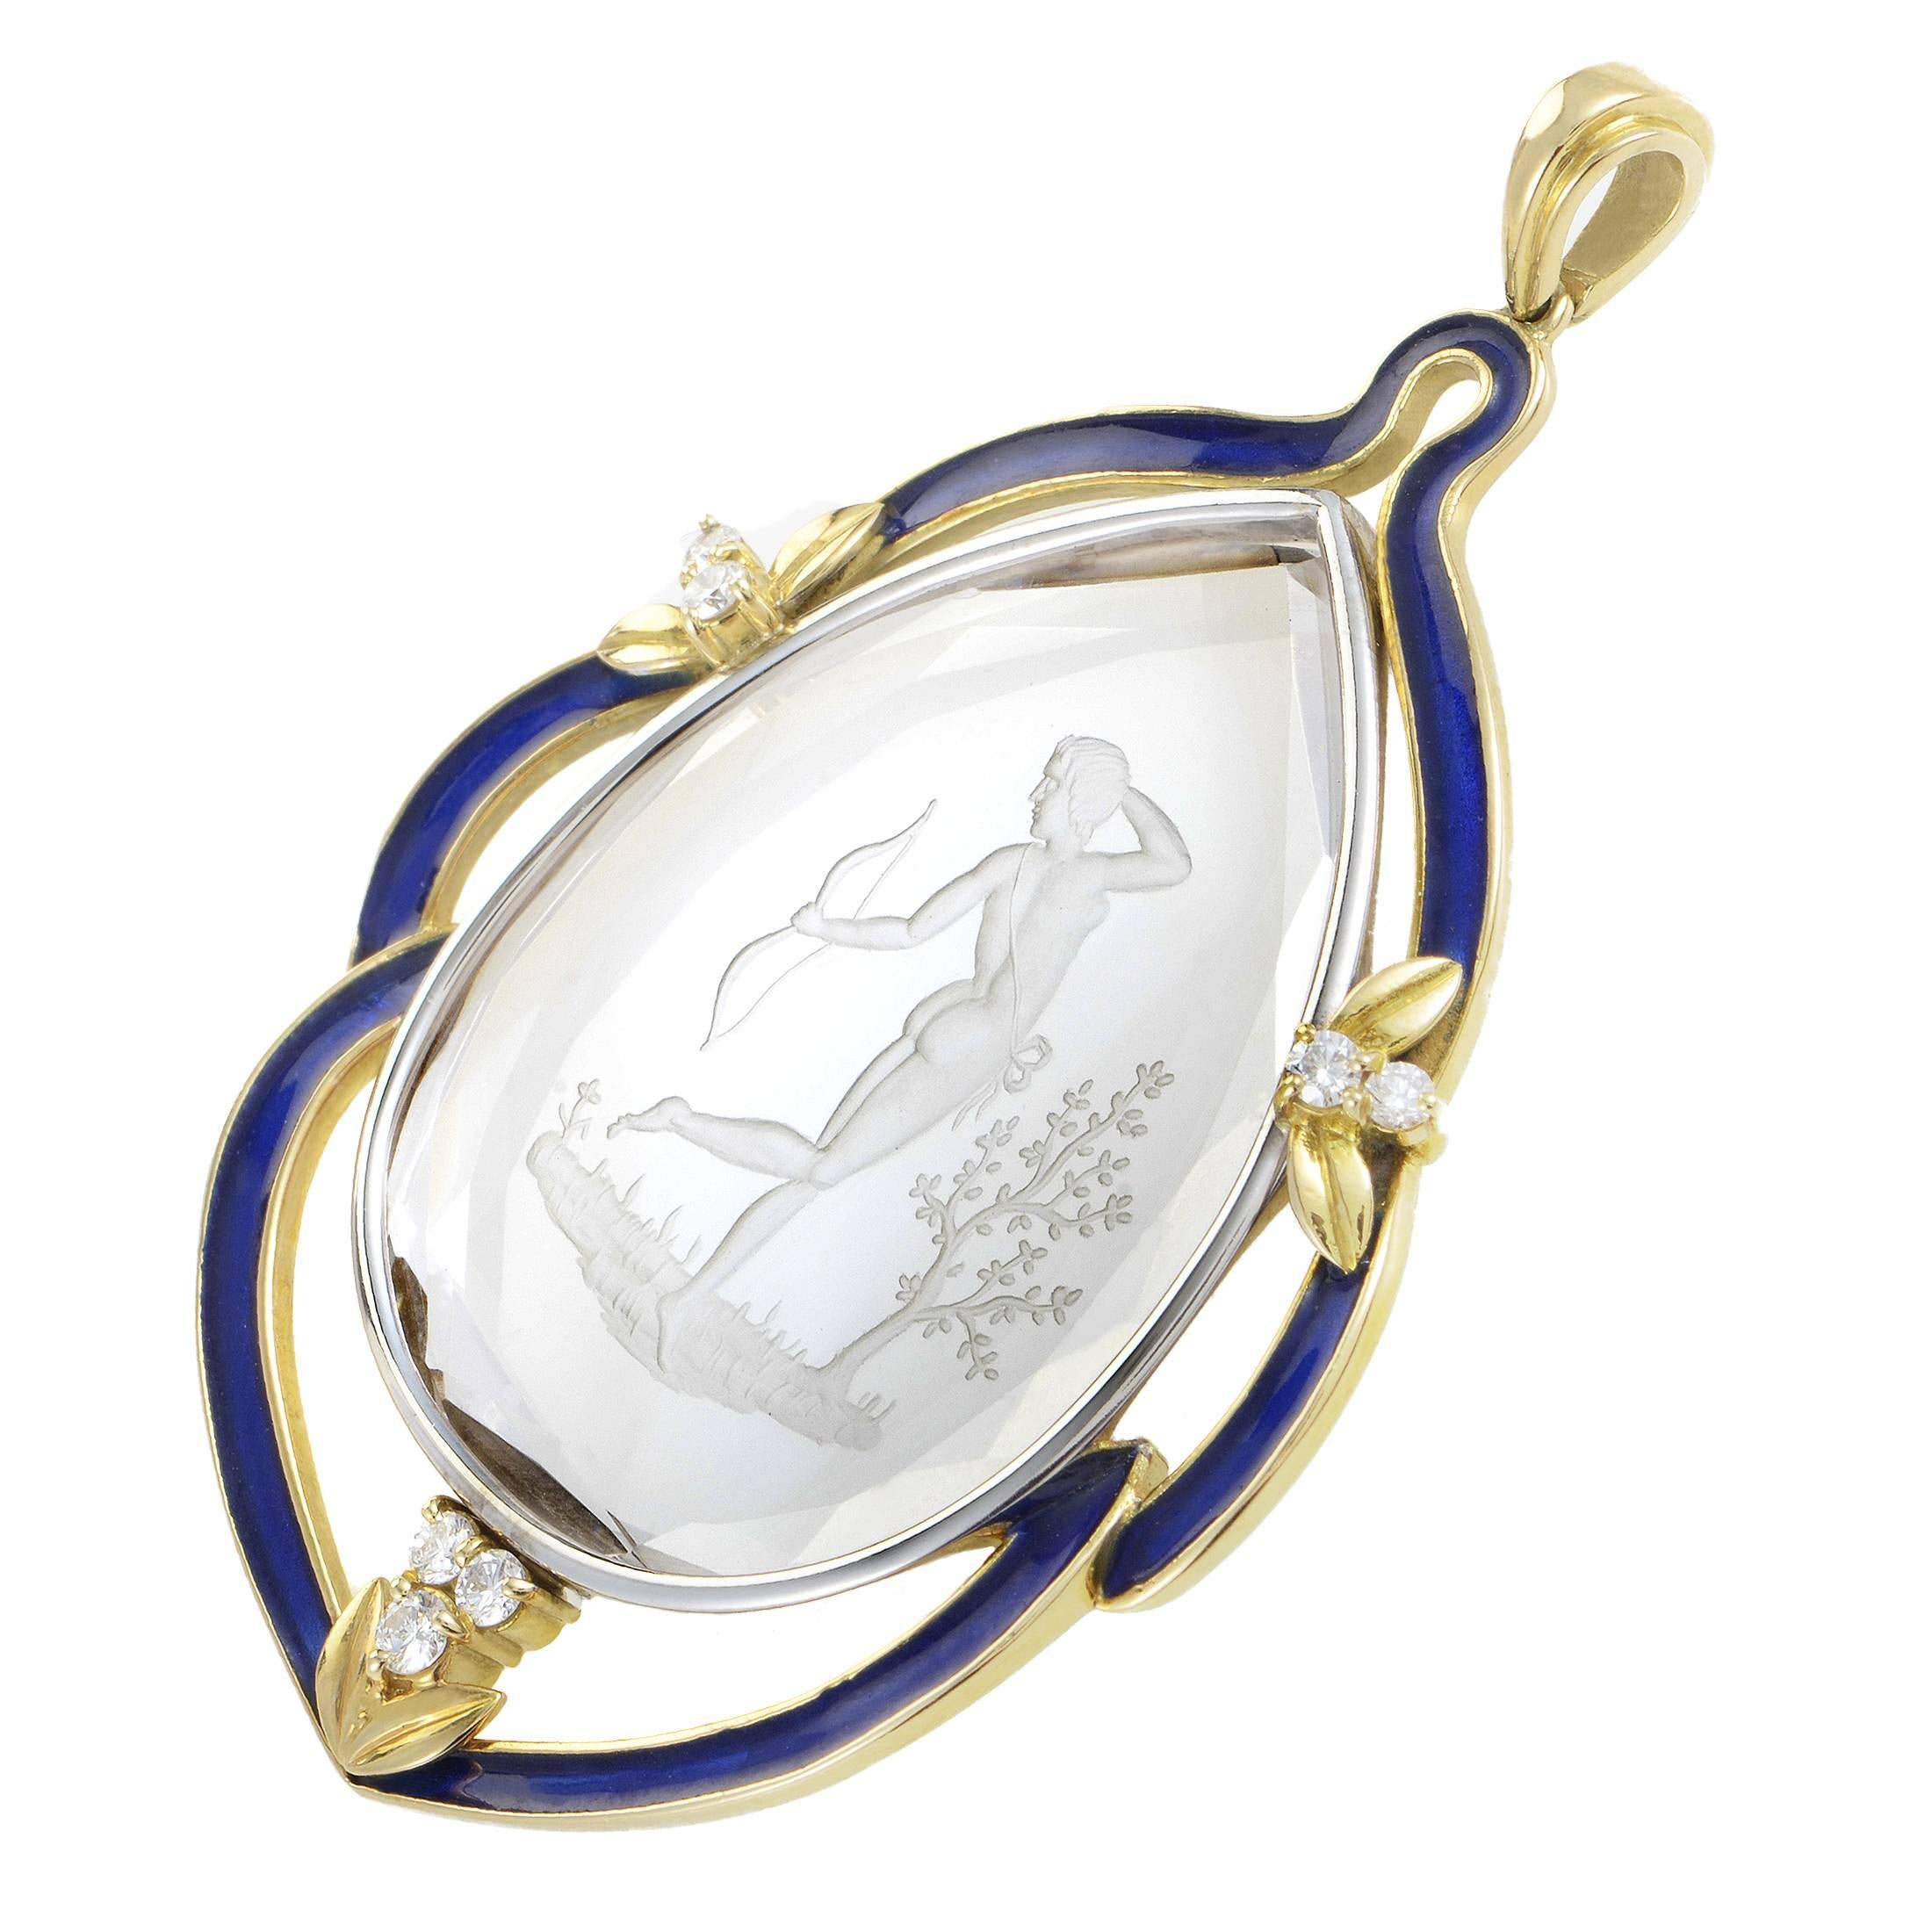 Boasting attractive blue enamel against radiant 18K yellow gold with 0.25ct of glistening diamonds set upon 18K white gold to enrich the sight, this outstanding pendant focuses the attention on the splendid clarity of the crystal and the wonderful